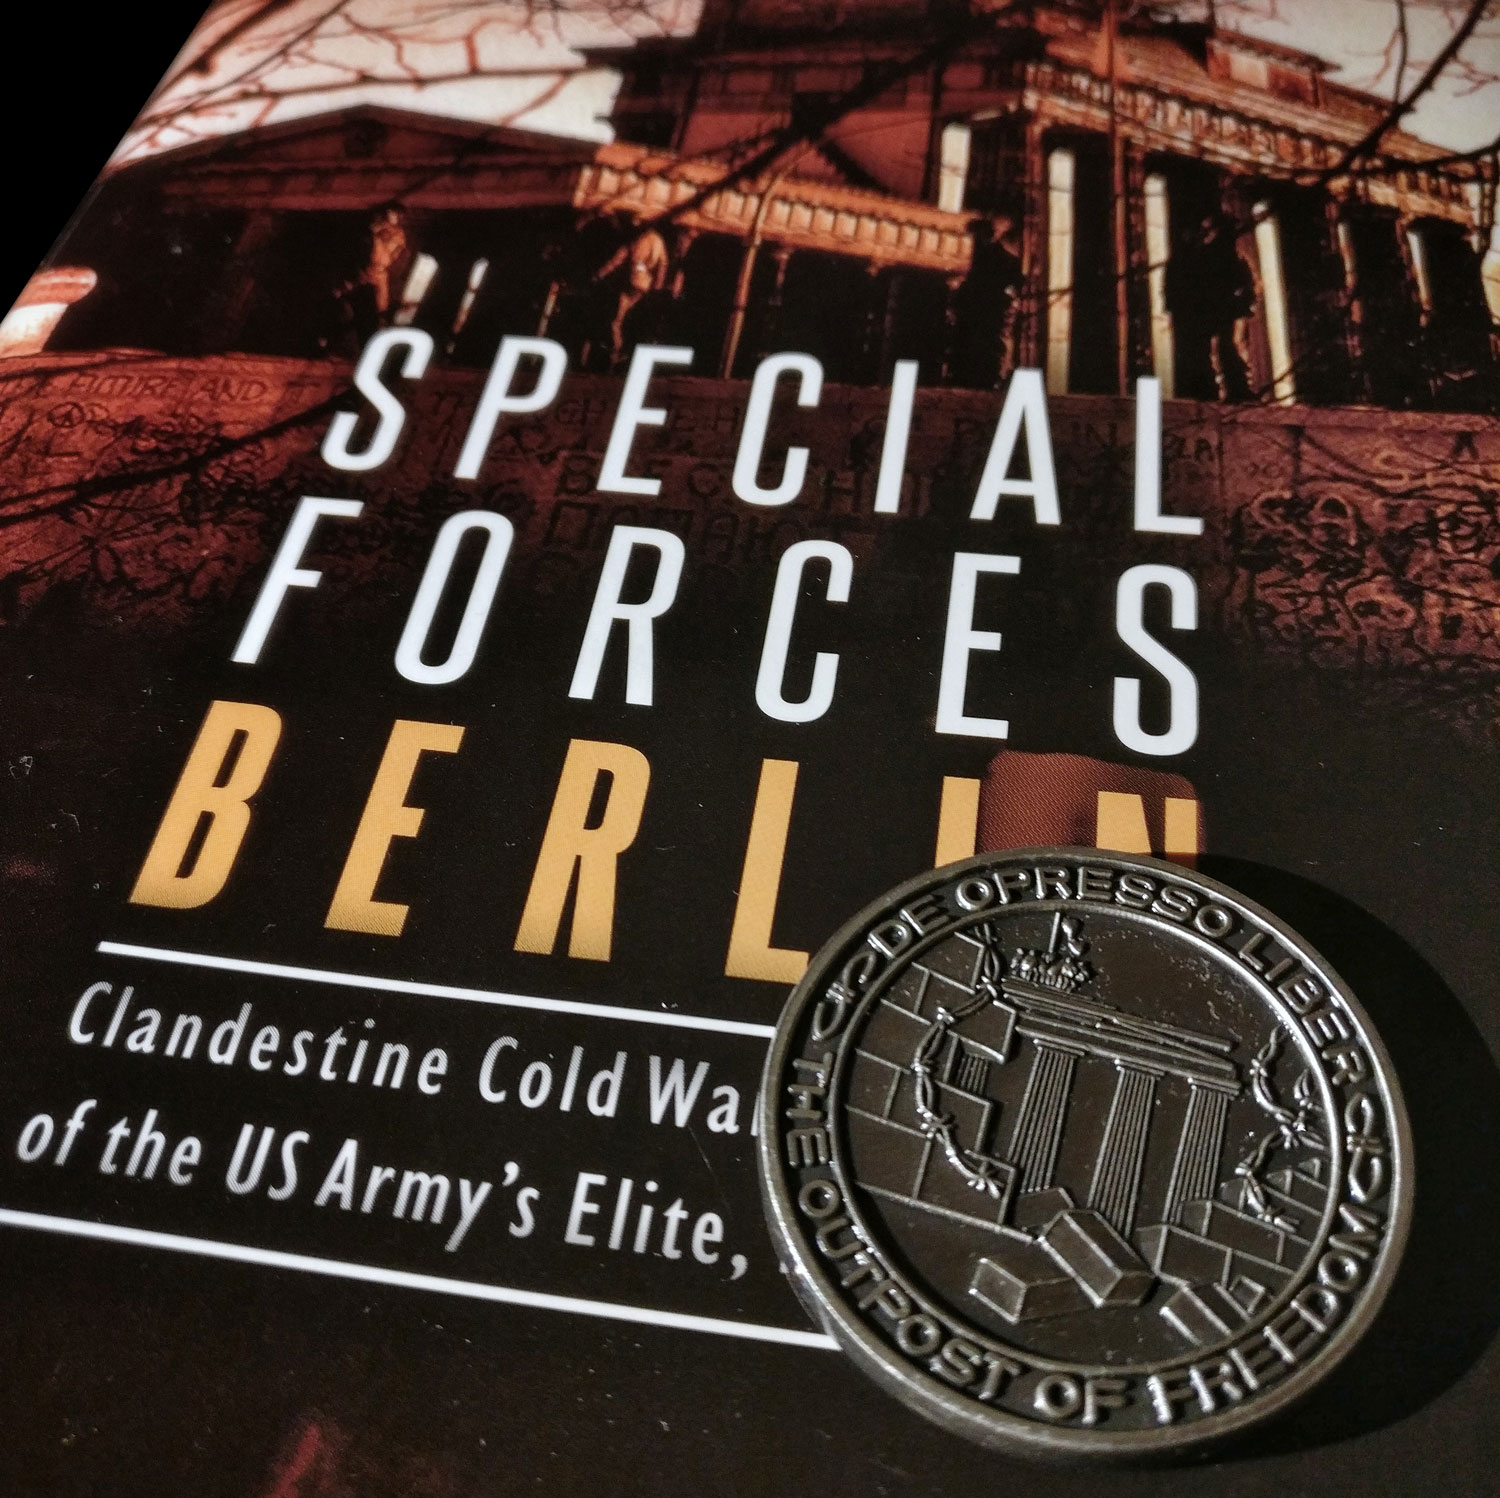 Outpost of freedom, challenge coin